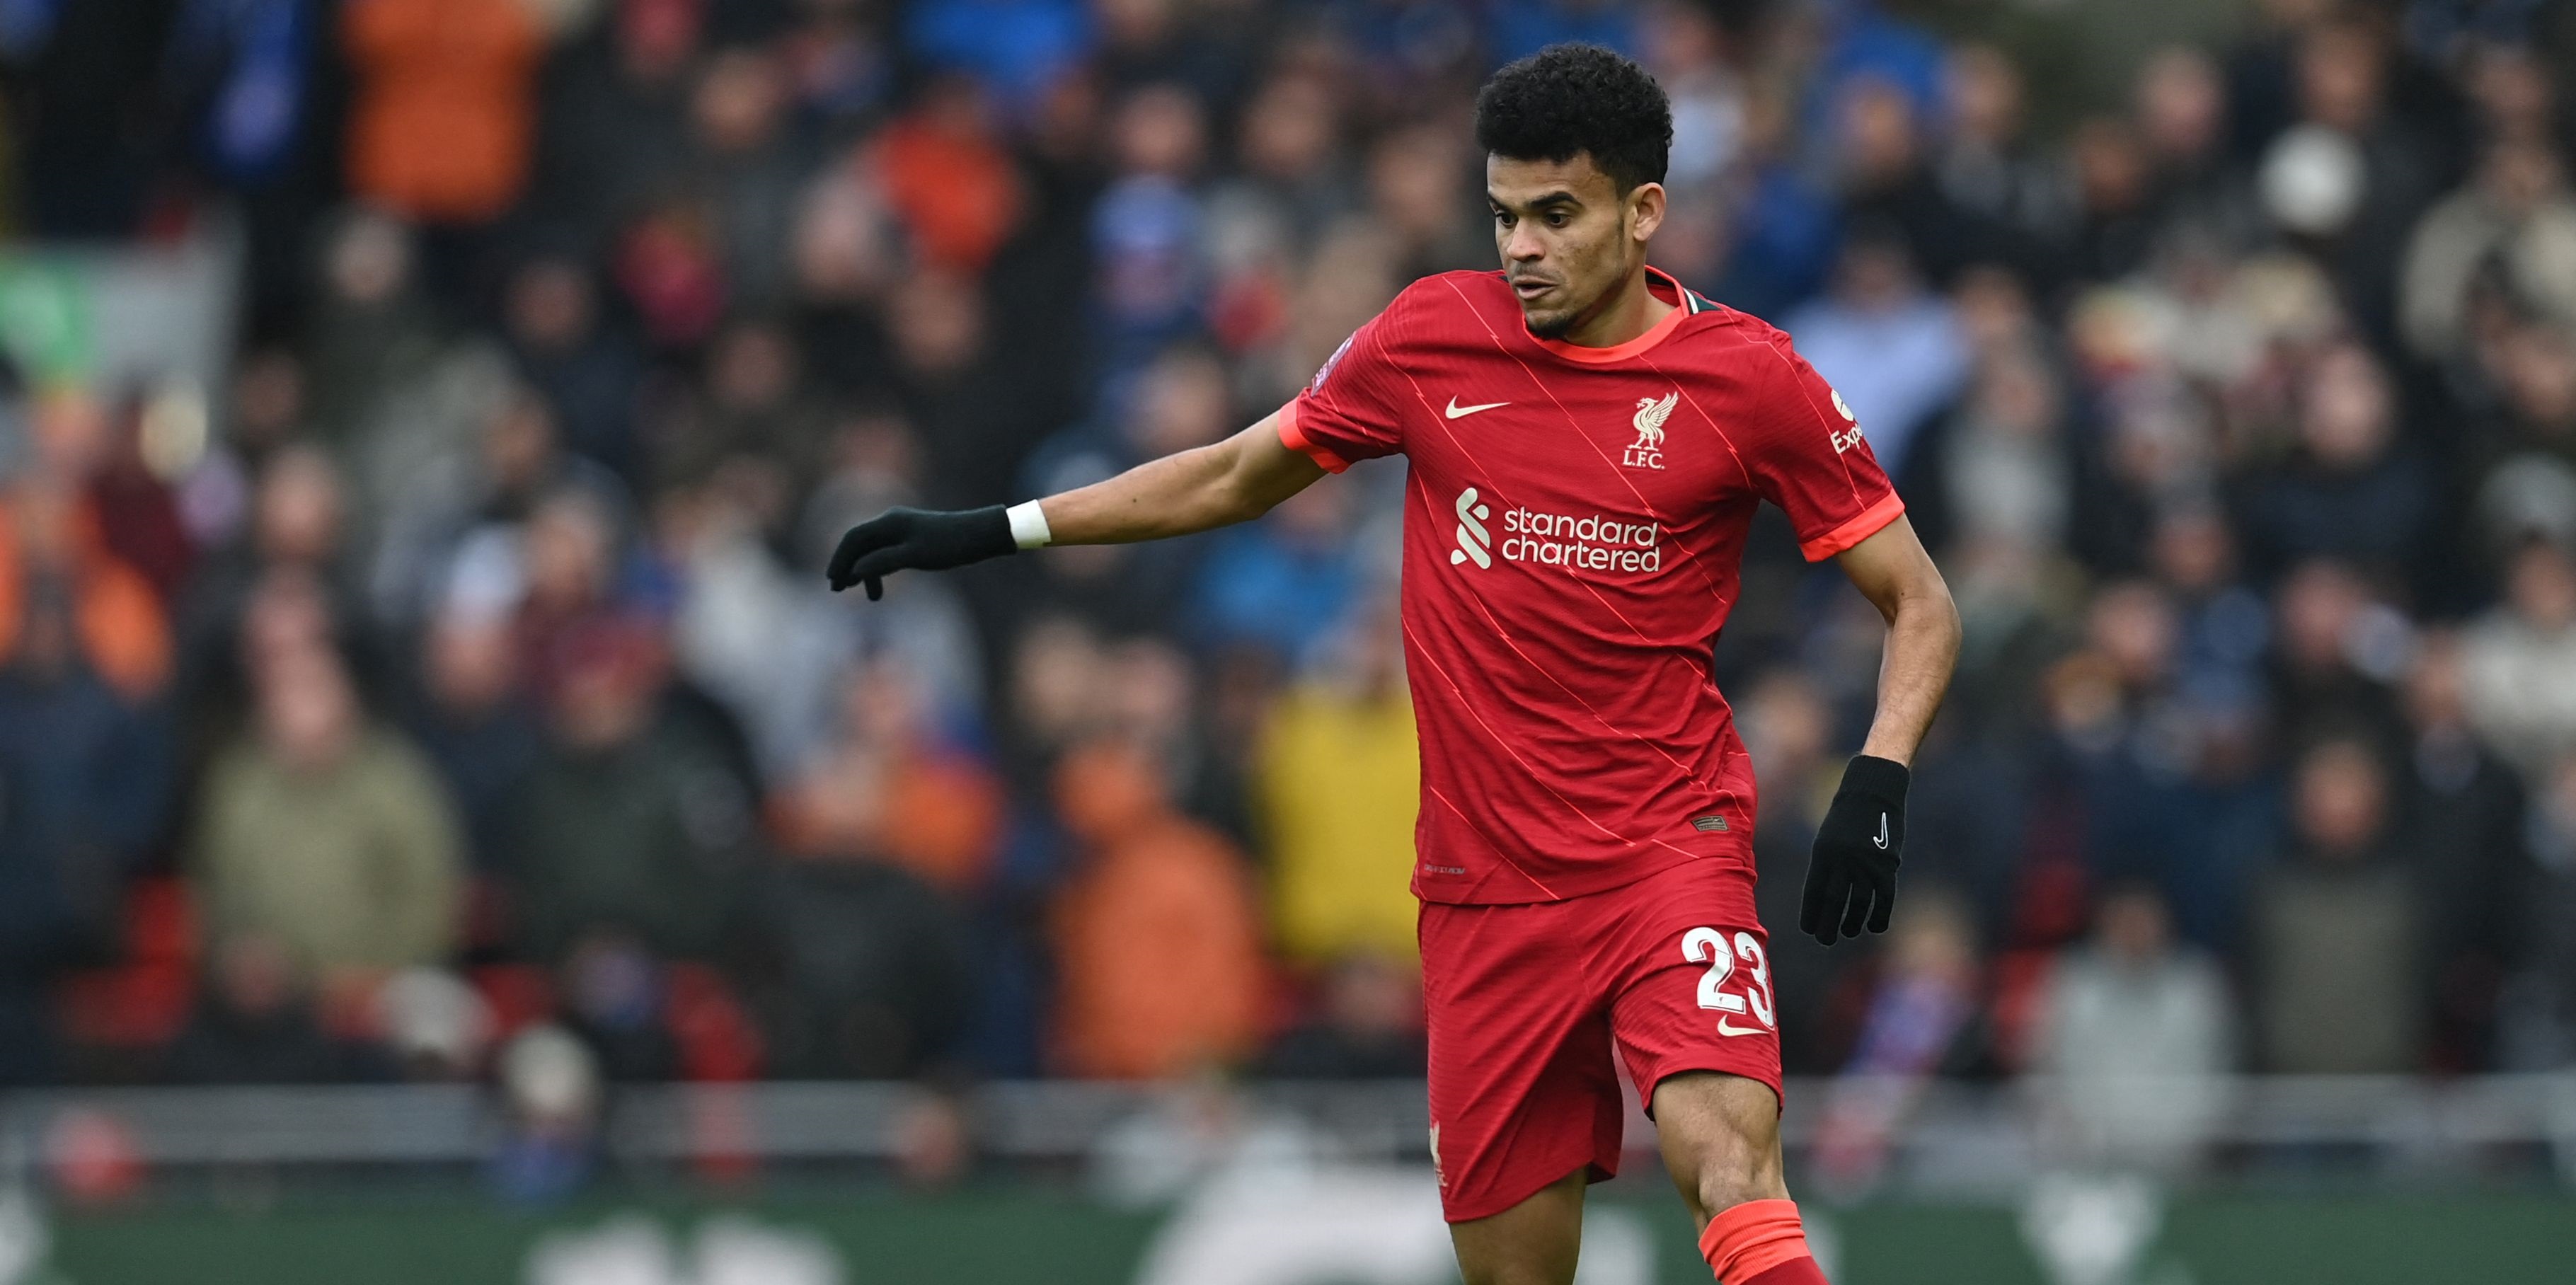 Ex-Arsenal man believes latest Liverpool signing will be a ‘proper player’ for Jurgen Klopp’s side